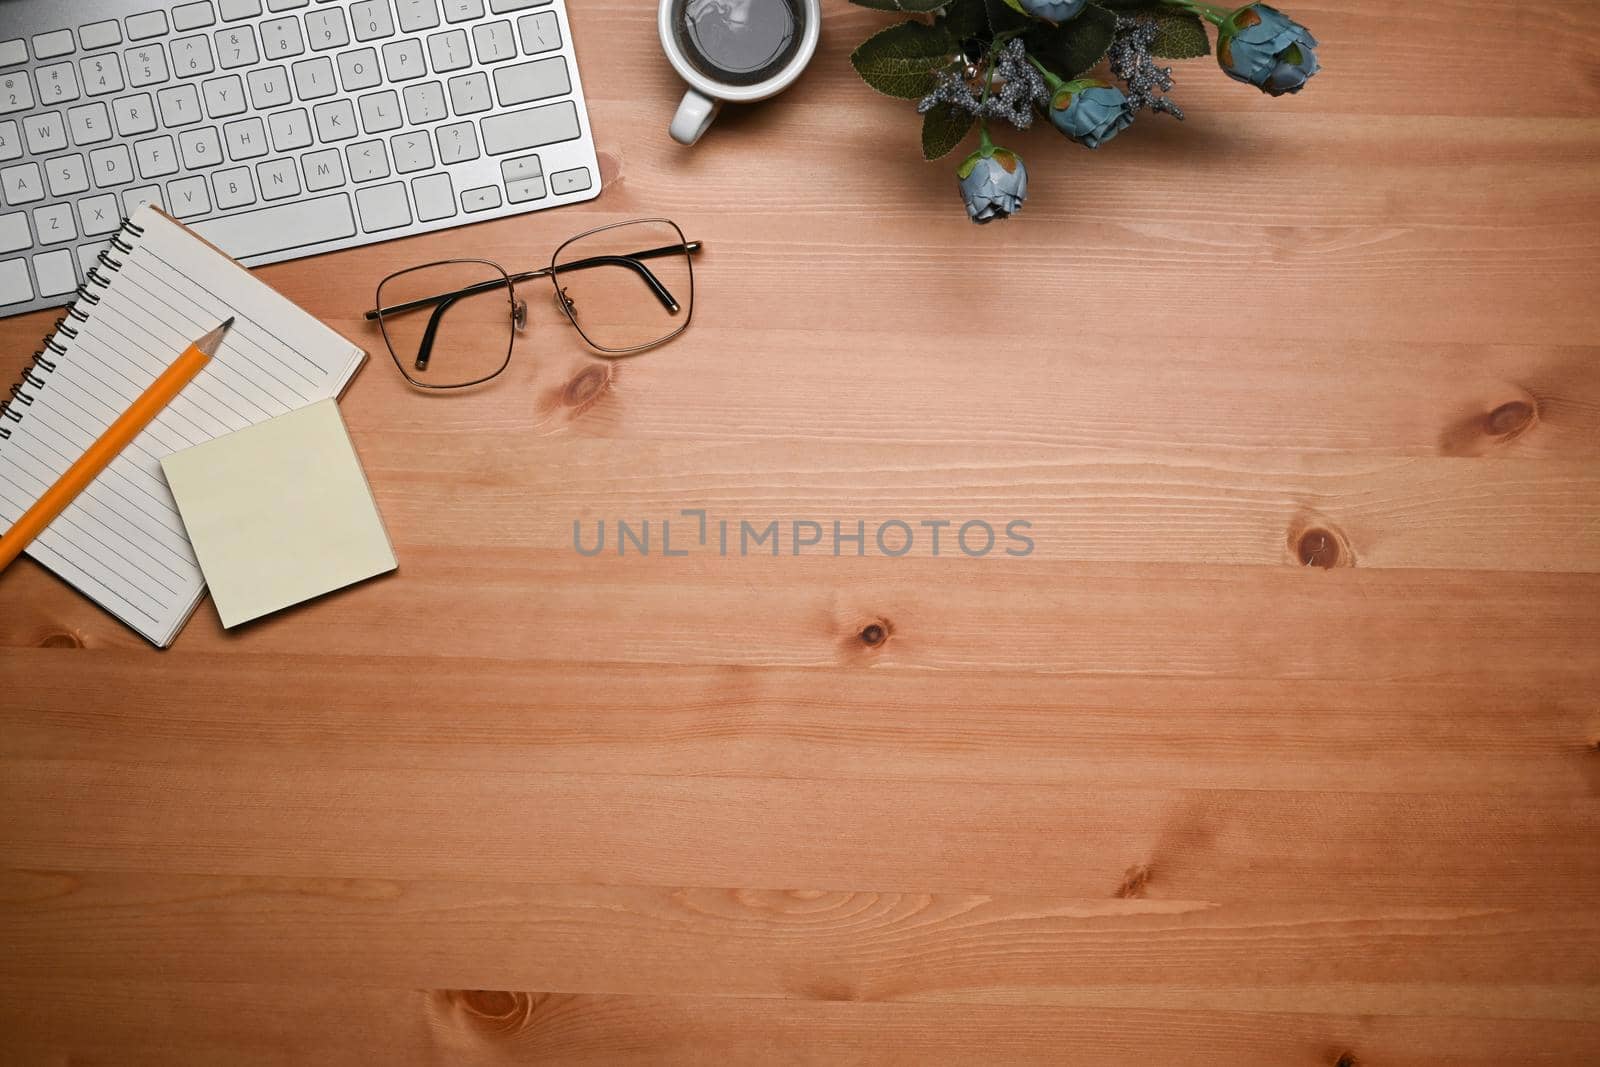 Above view keyboard, glasses, coffee cup and notebook on wooden table. by prathanchorruangsak